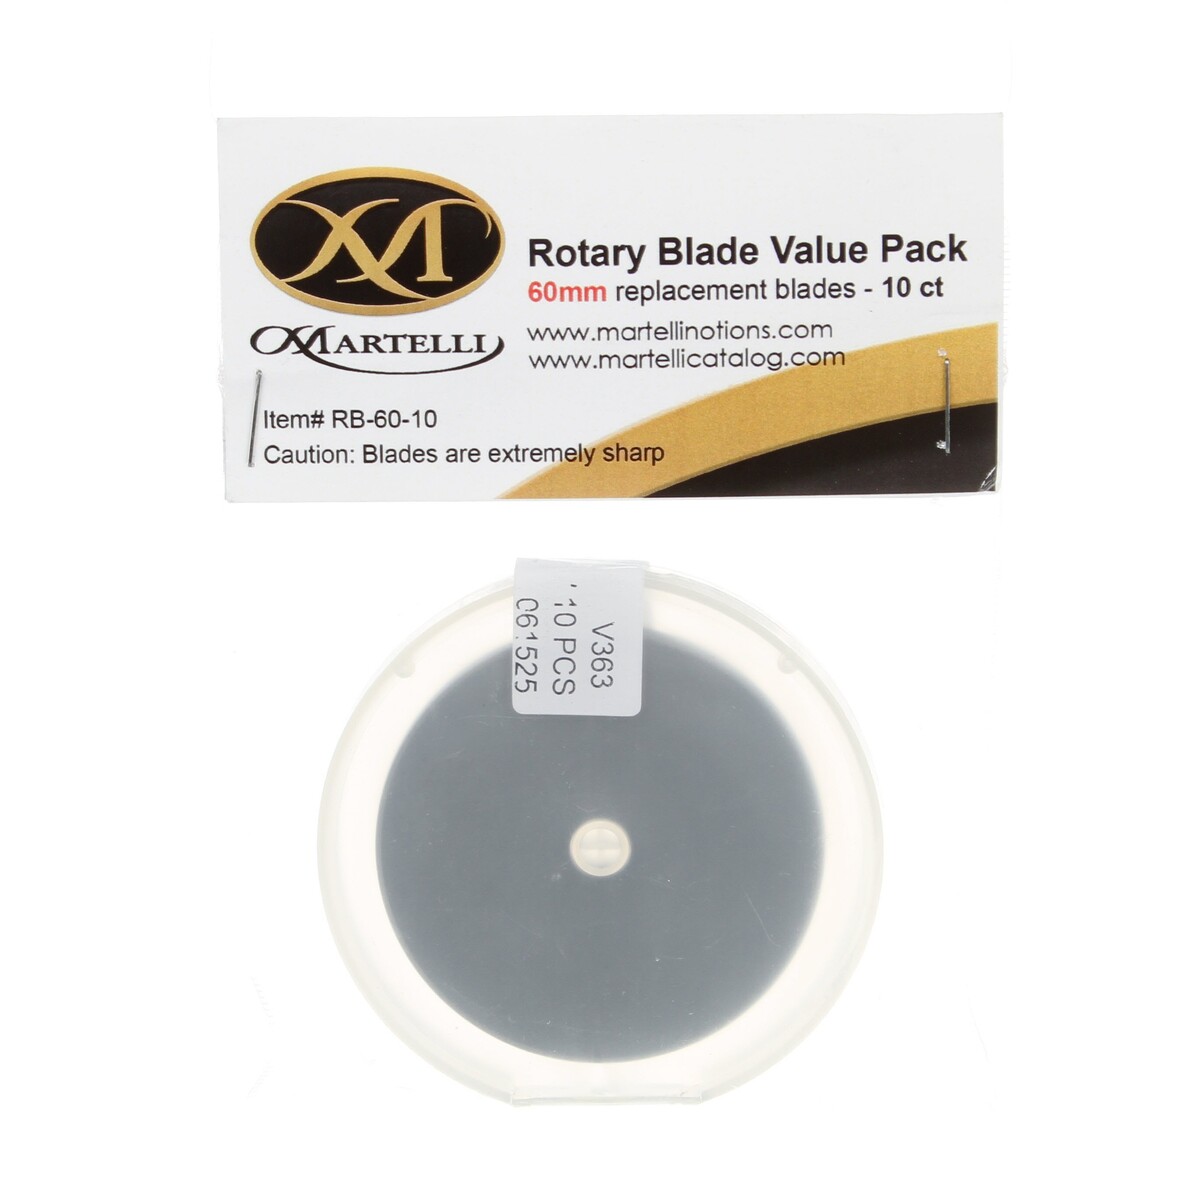 Olfa RB 60 Rotary Cutter Blades (5 pack)